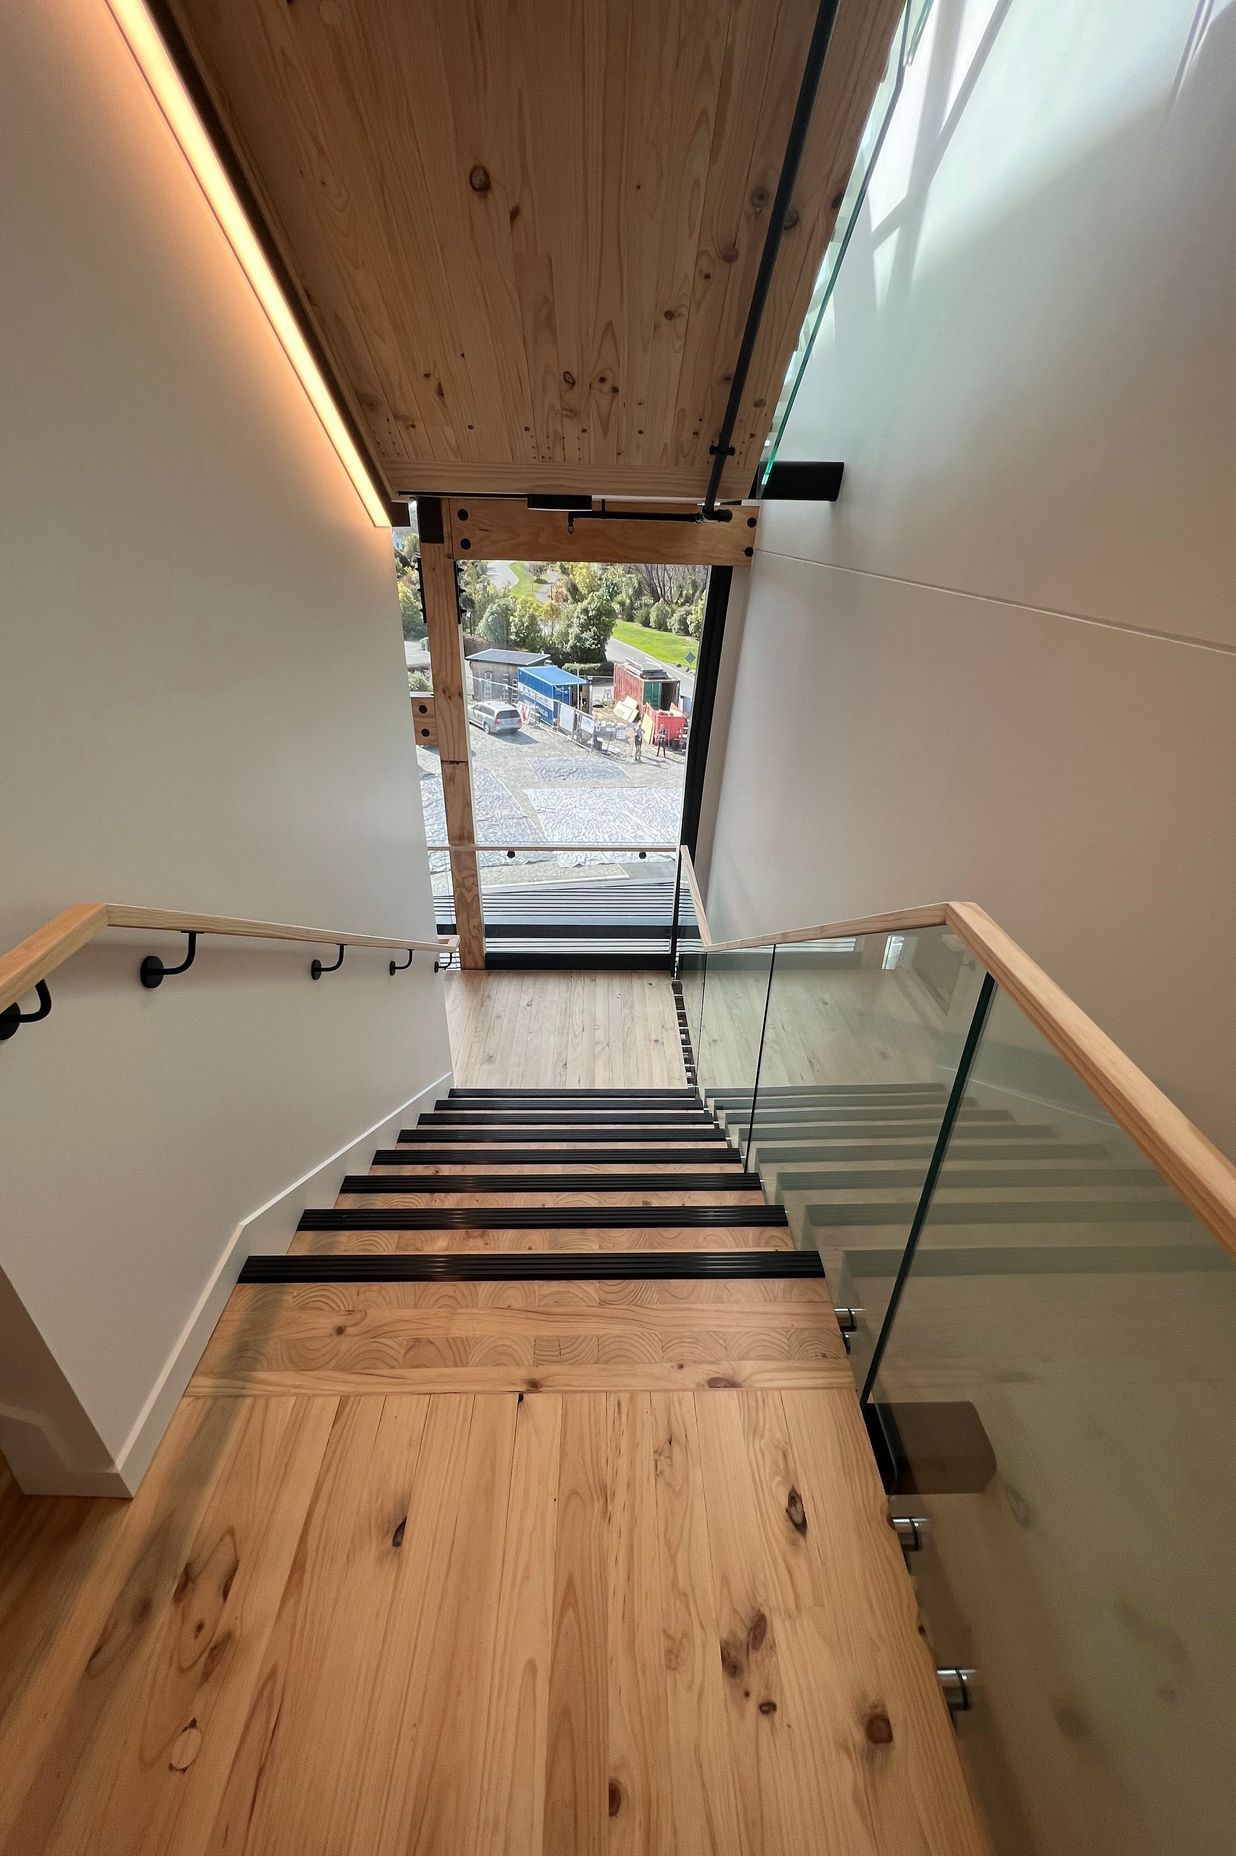 The stairwell also features beautiful timber floors and exposed LVL beams.